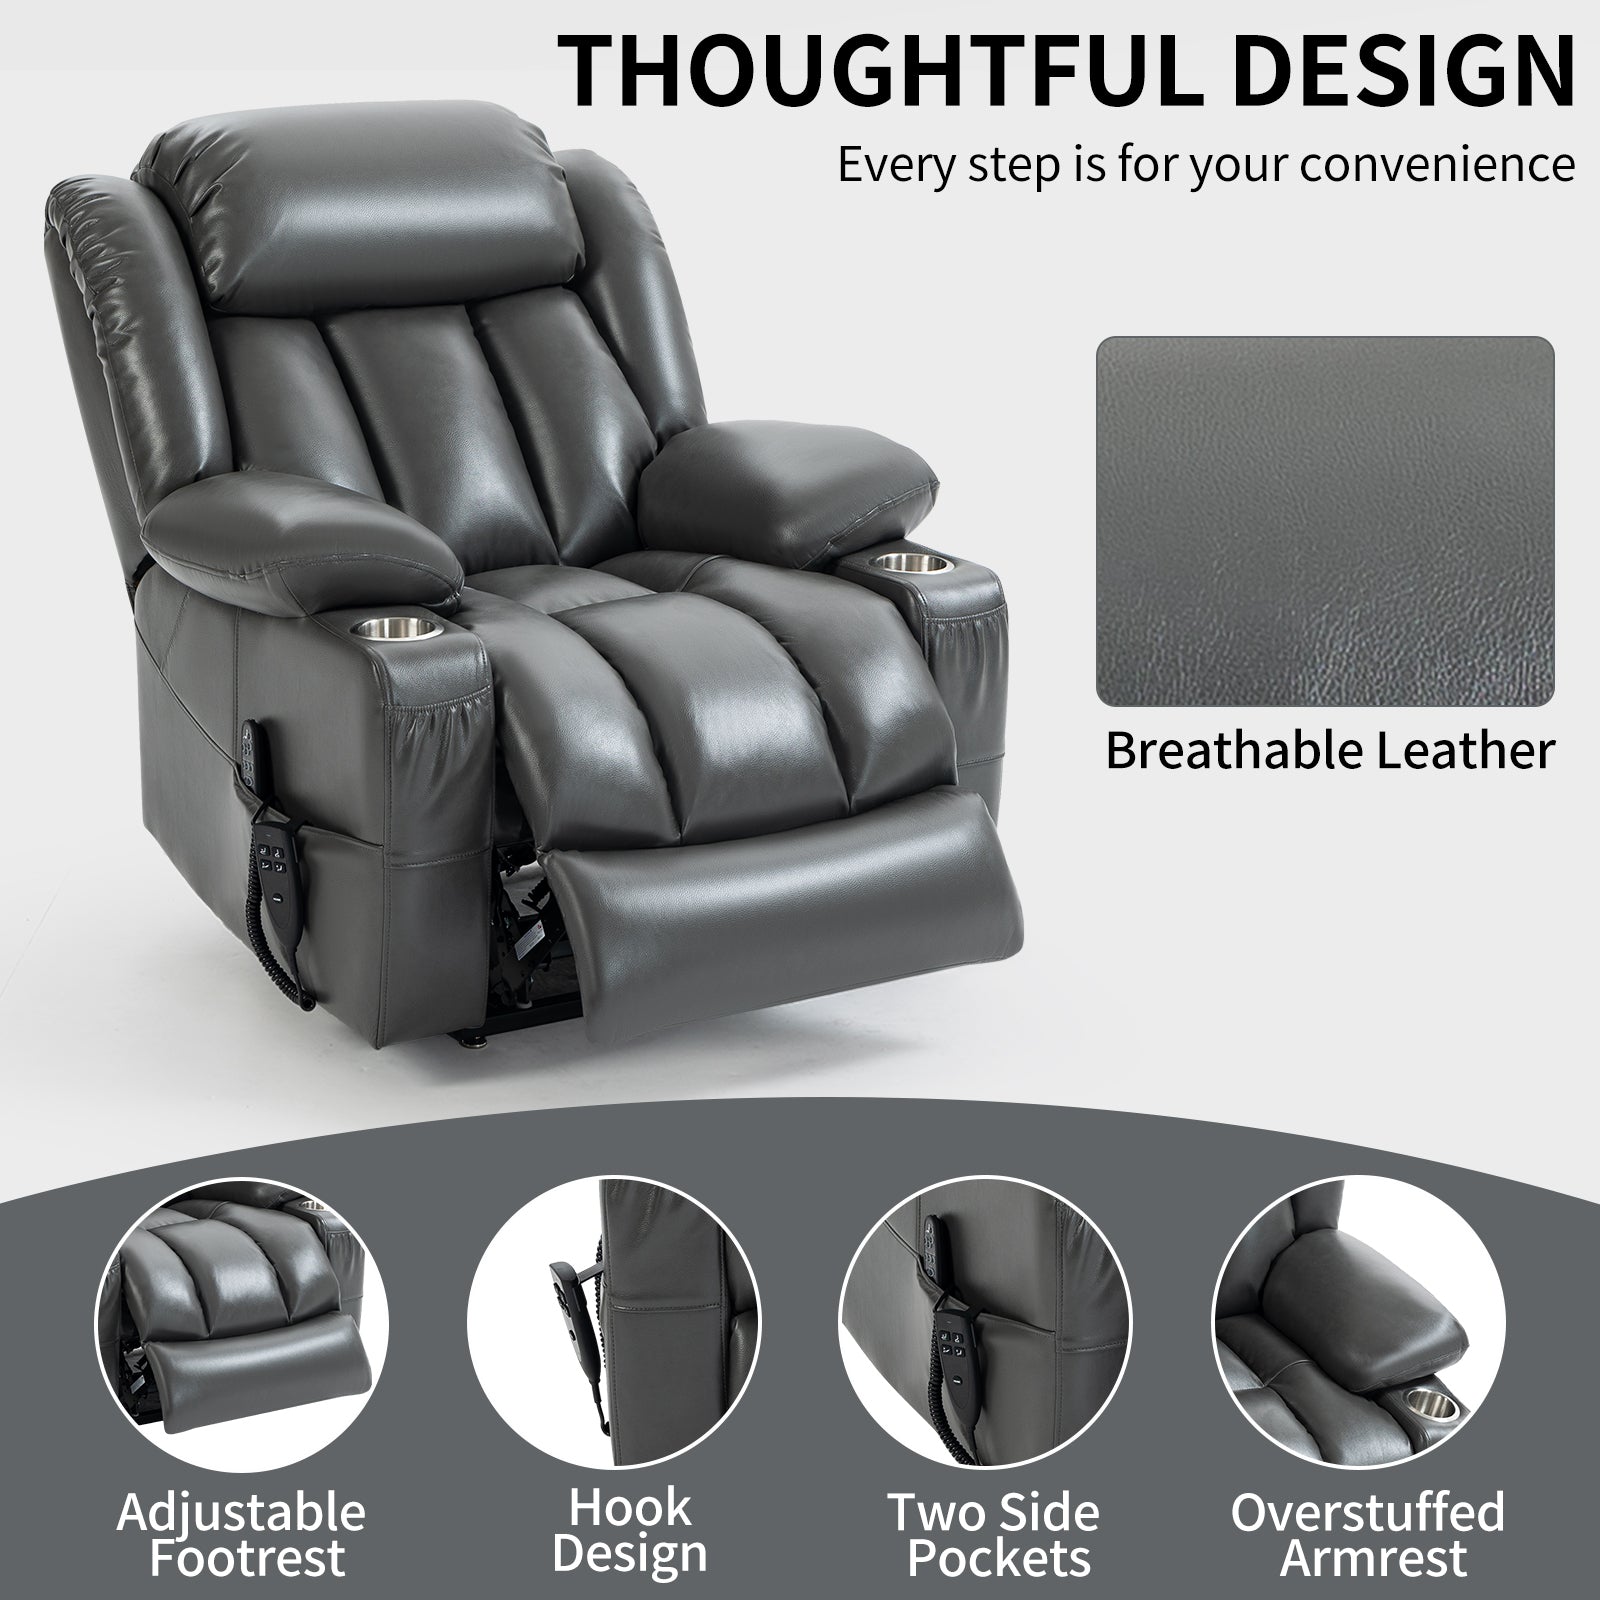 Grey Leatheraire Power Lift Recliner Chair, design features